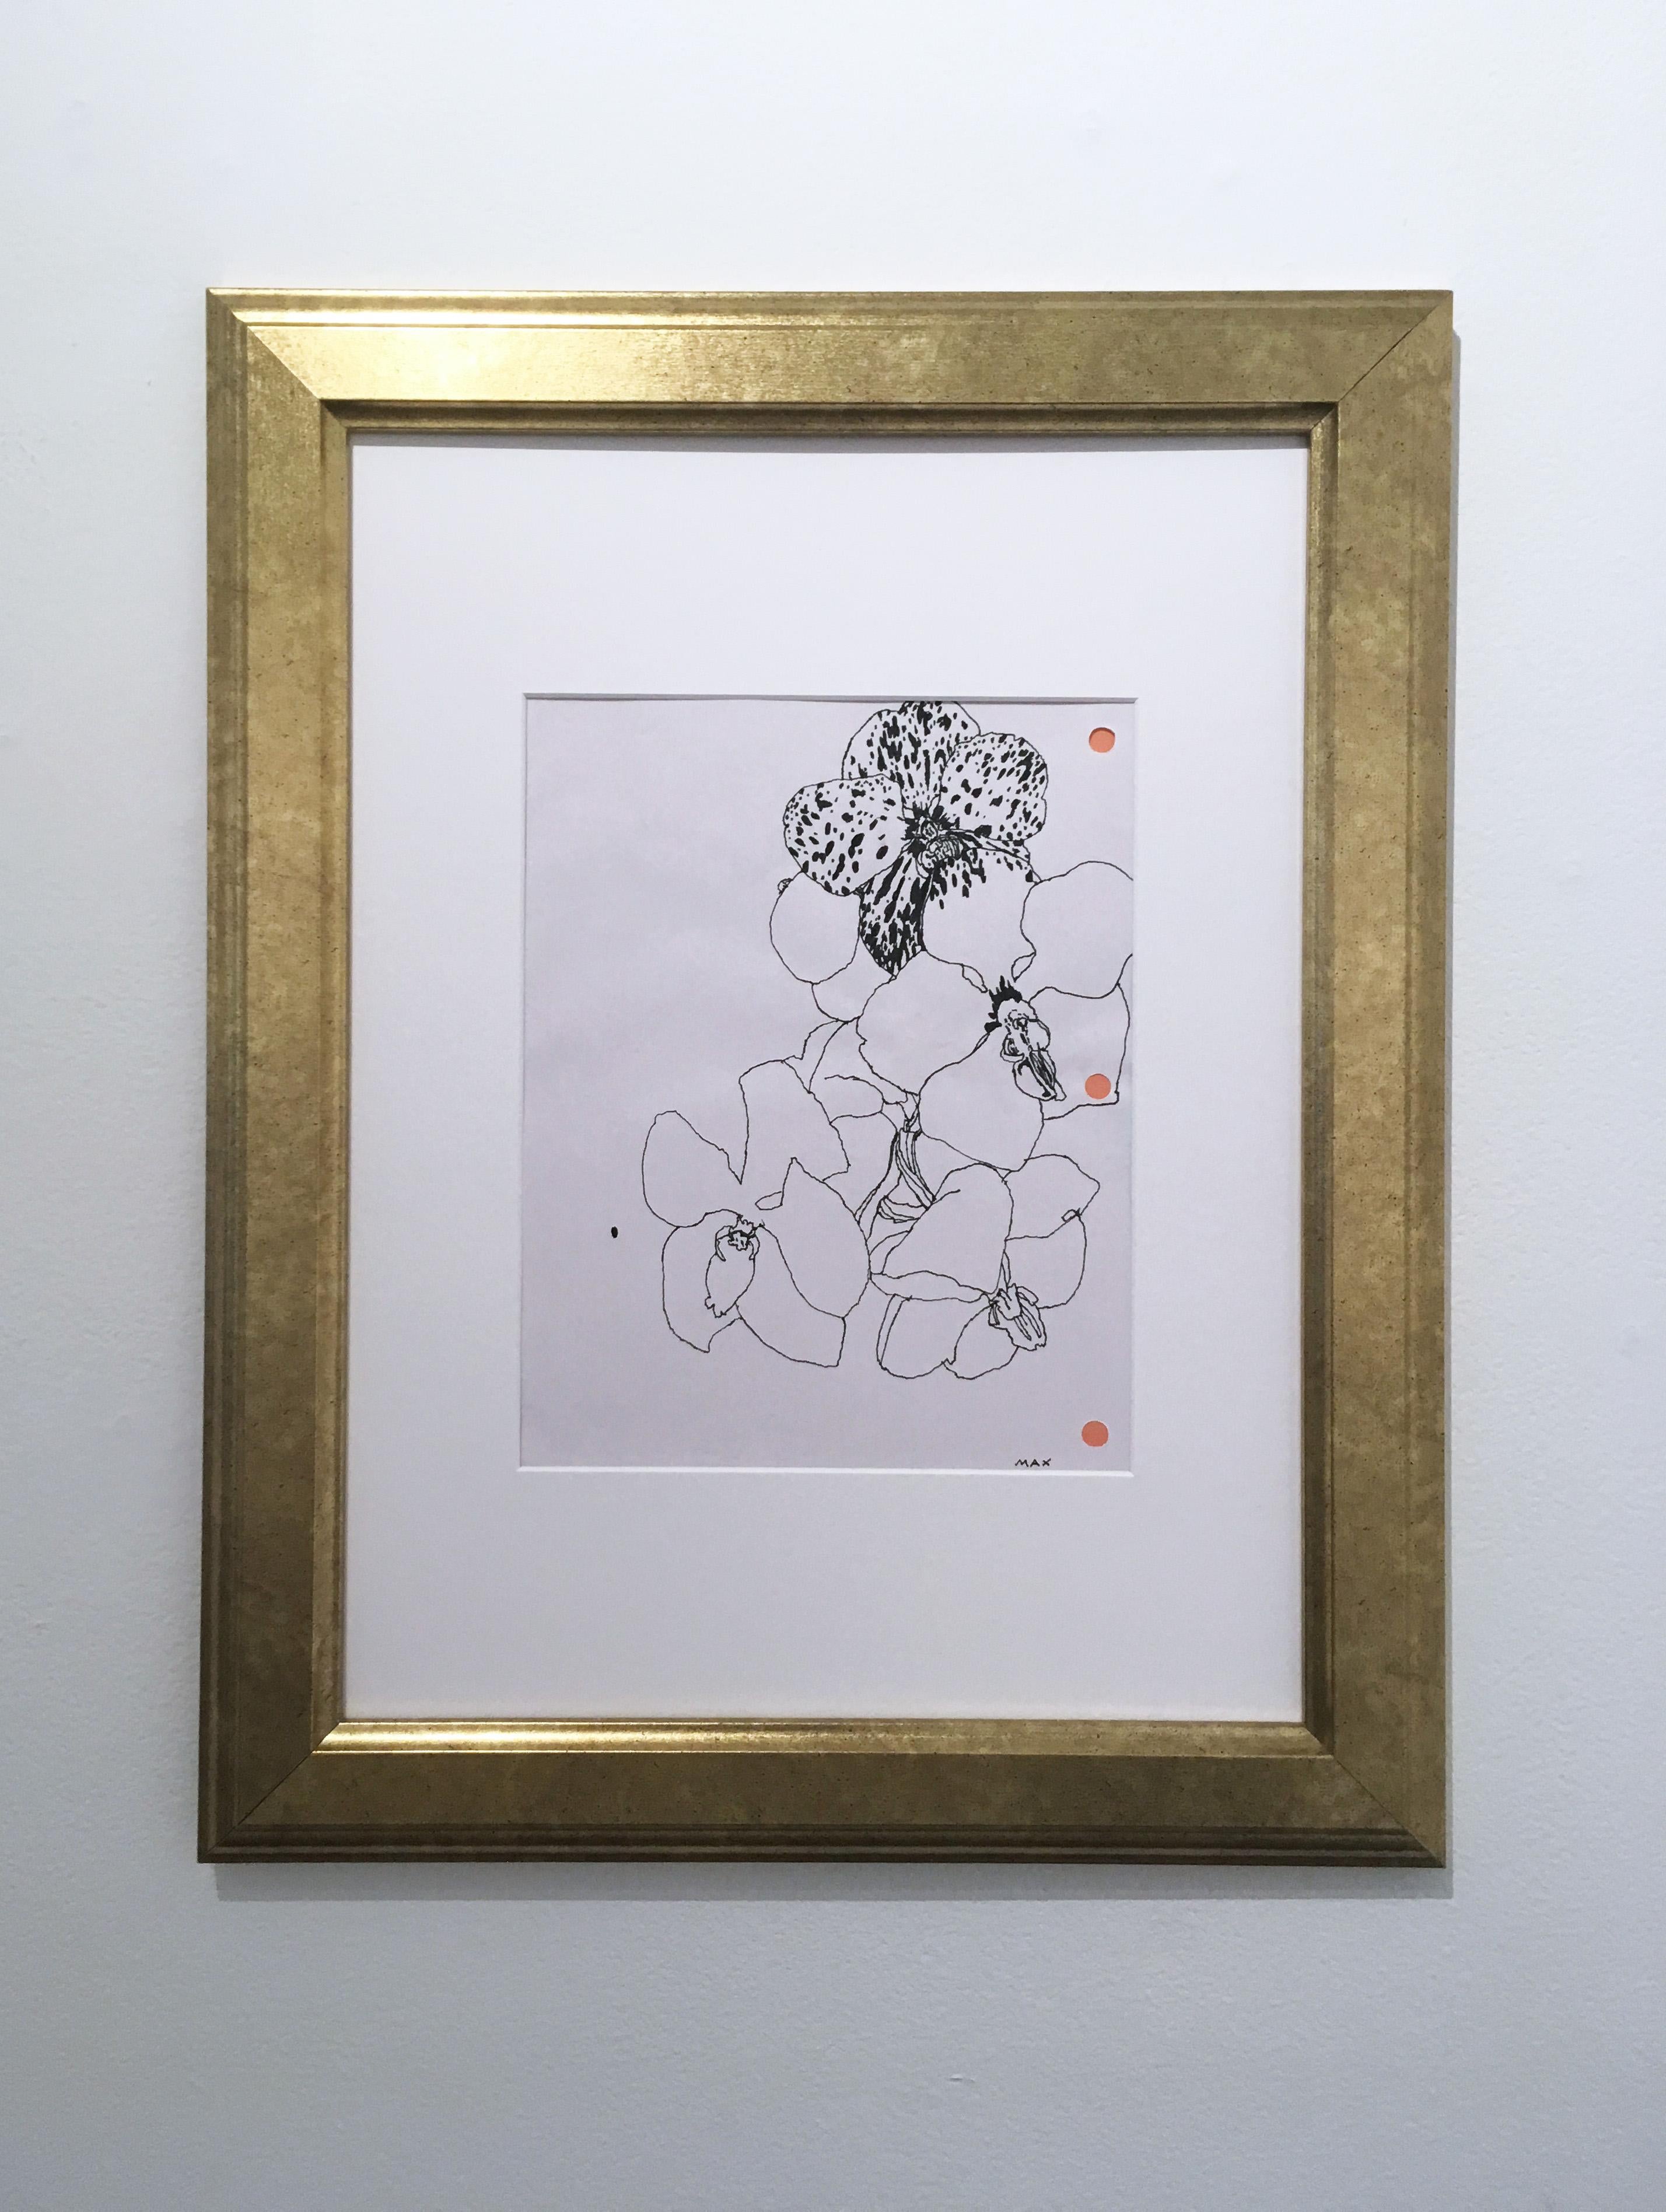 3 Hole Punch Orchids, black and white, pink, floral, pen on paper, gold frame - Art by Max Vesuvius Budnick